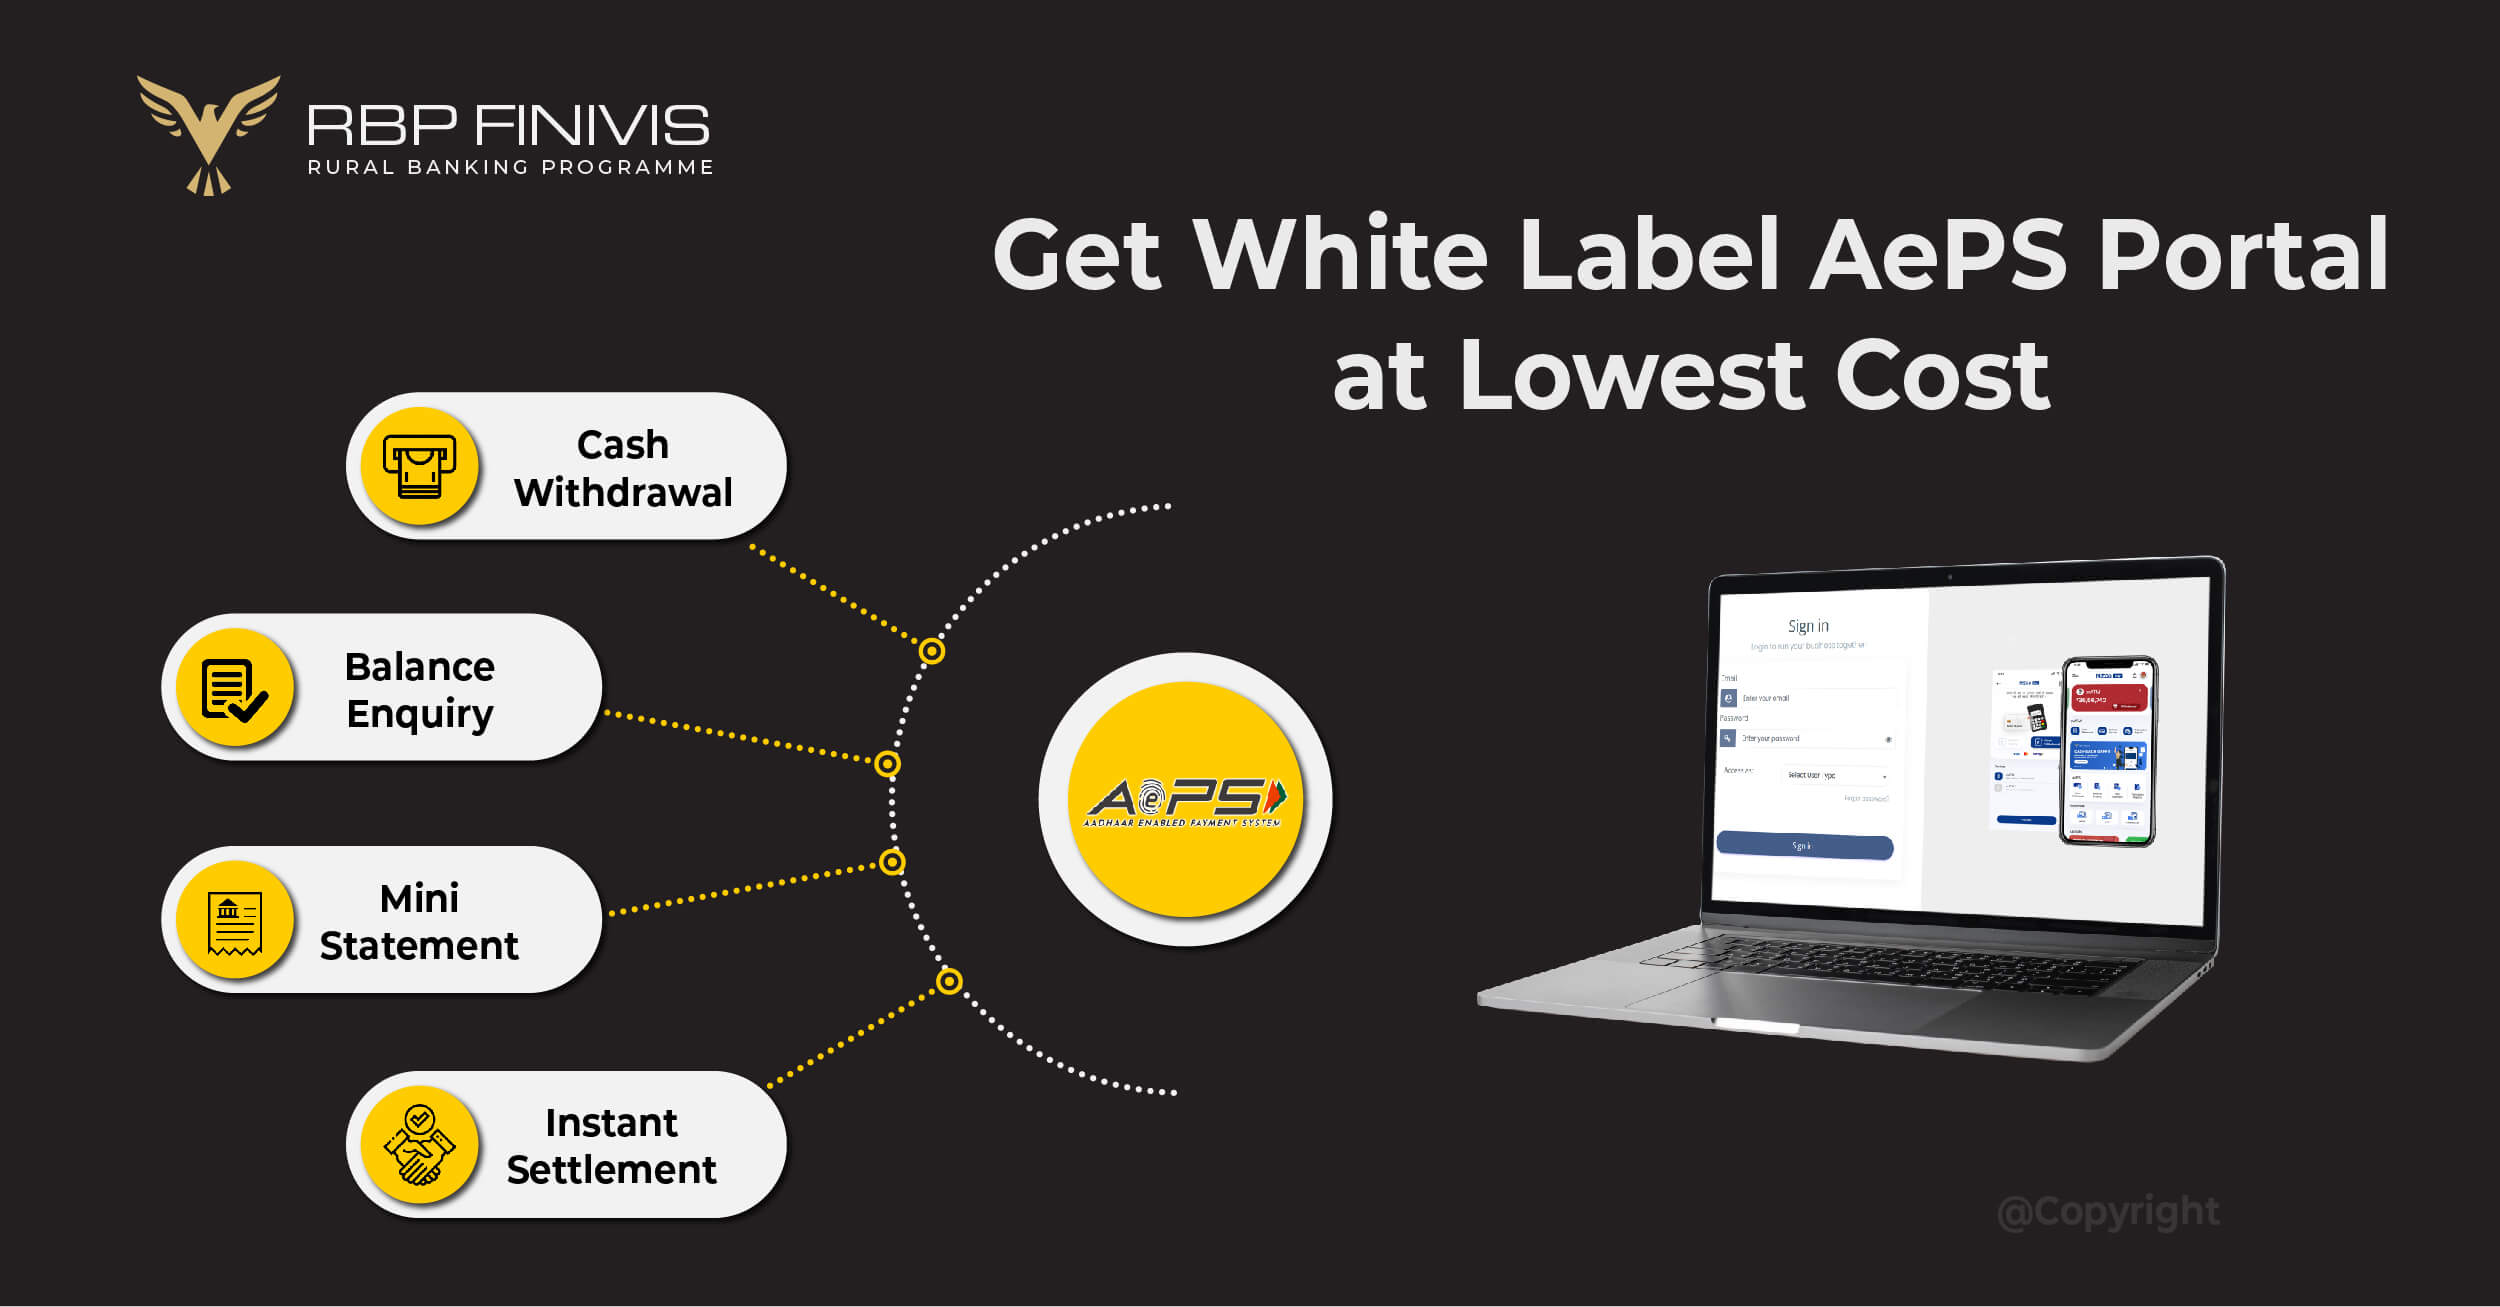 aeps white label portal at lowest cost